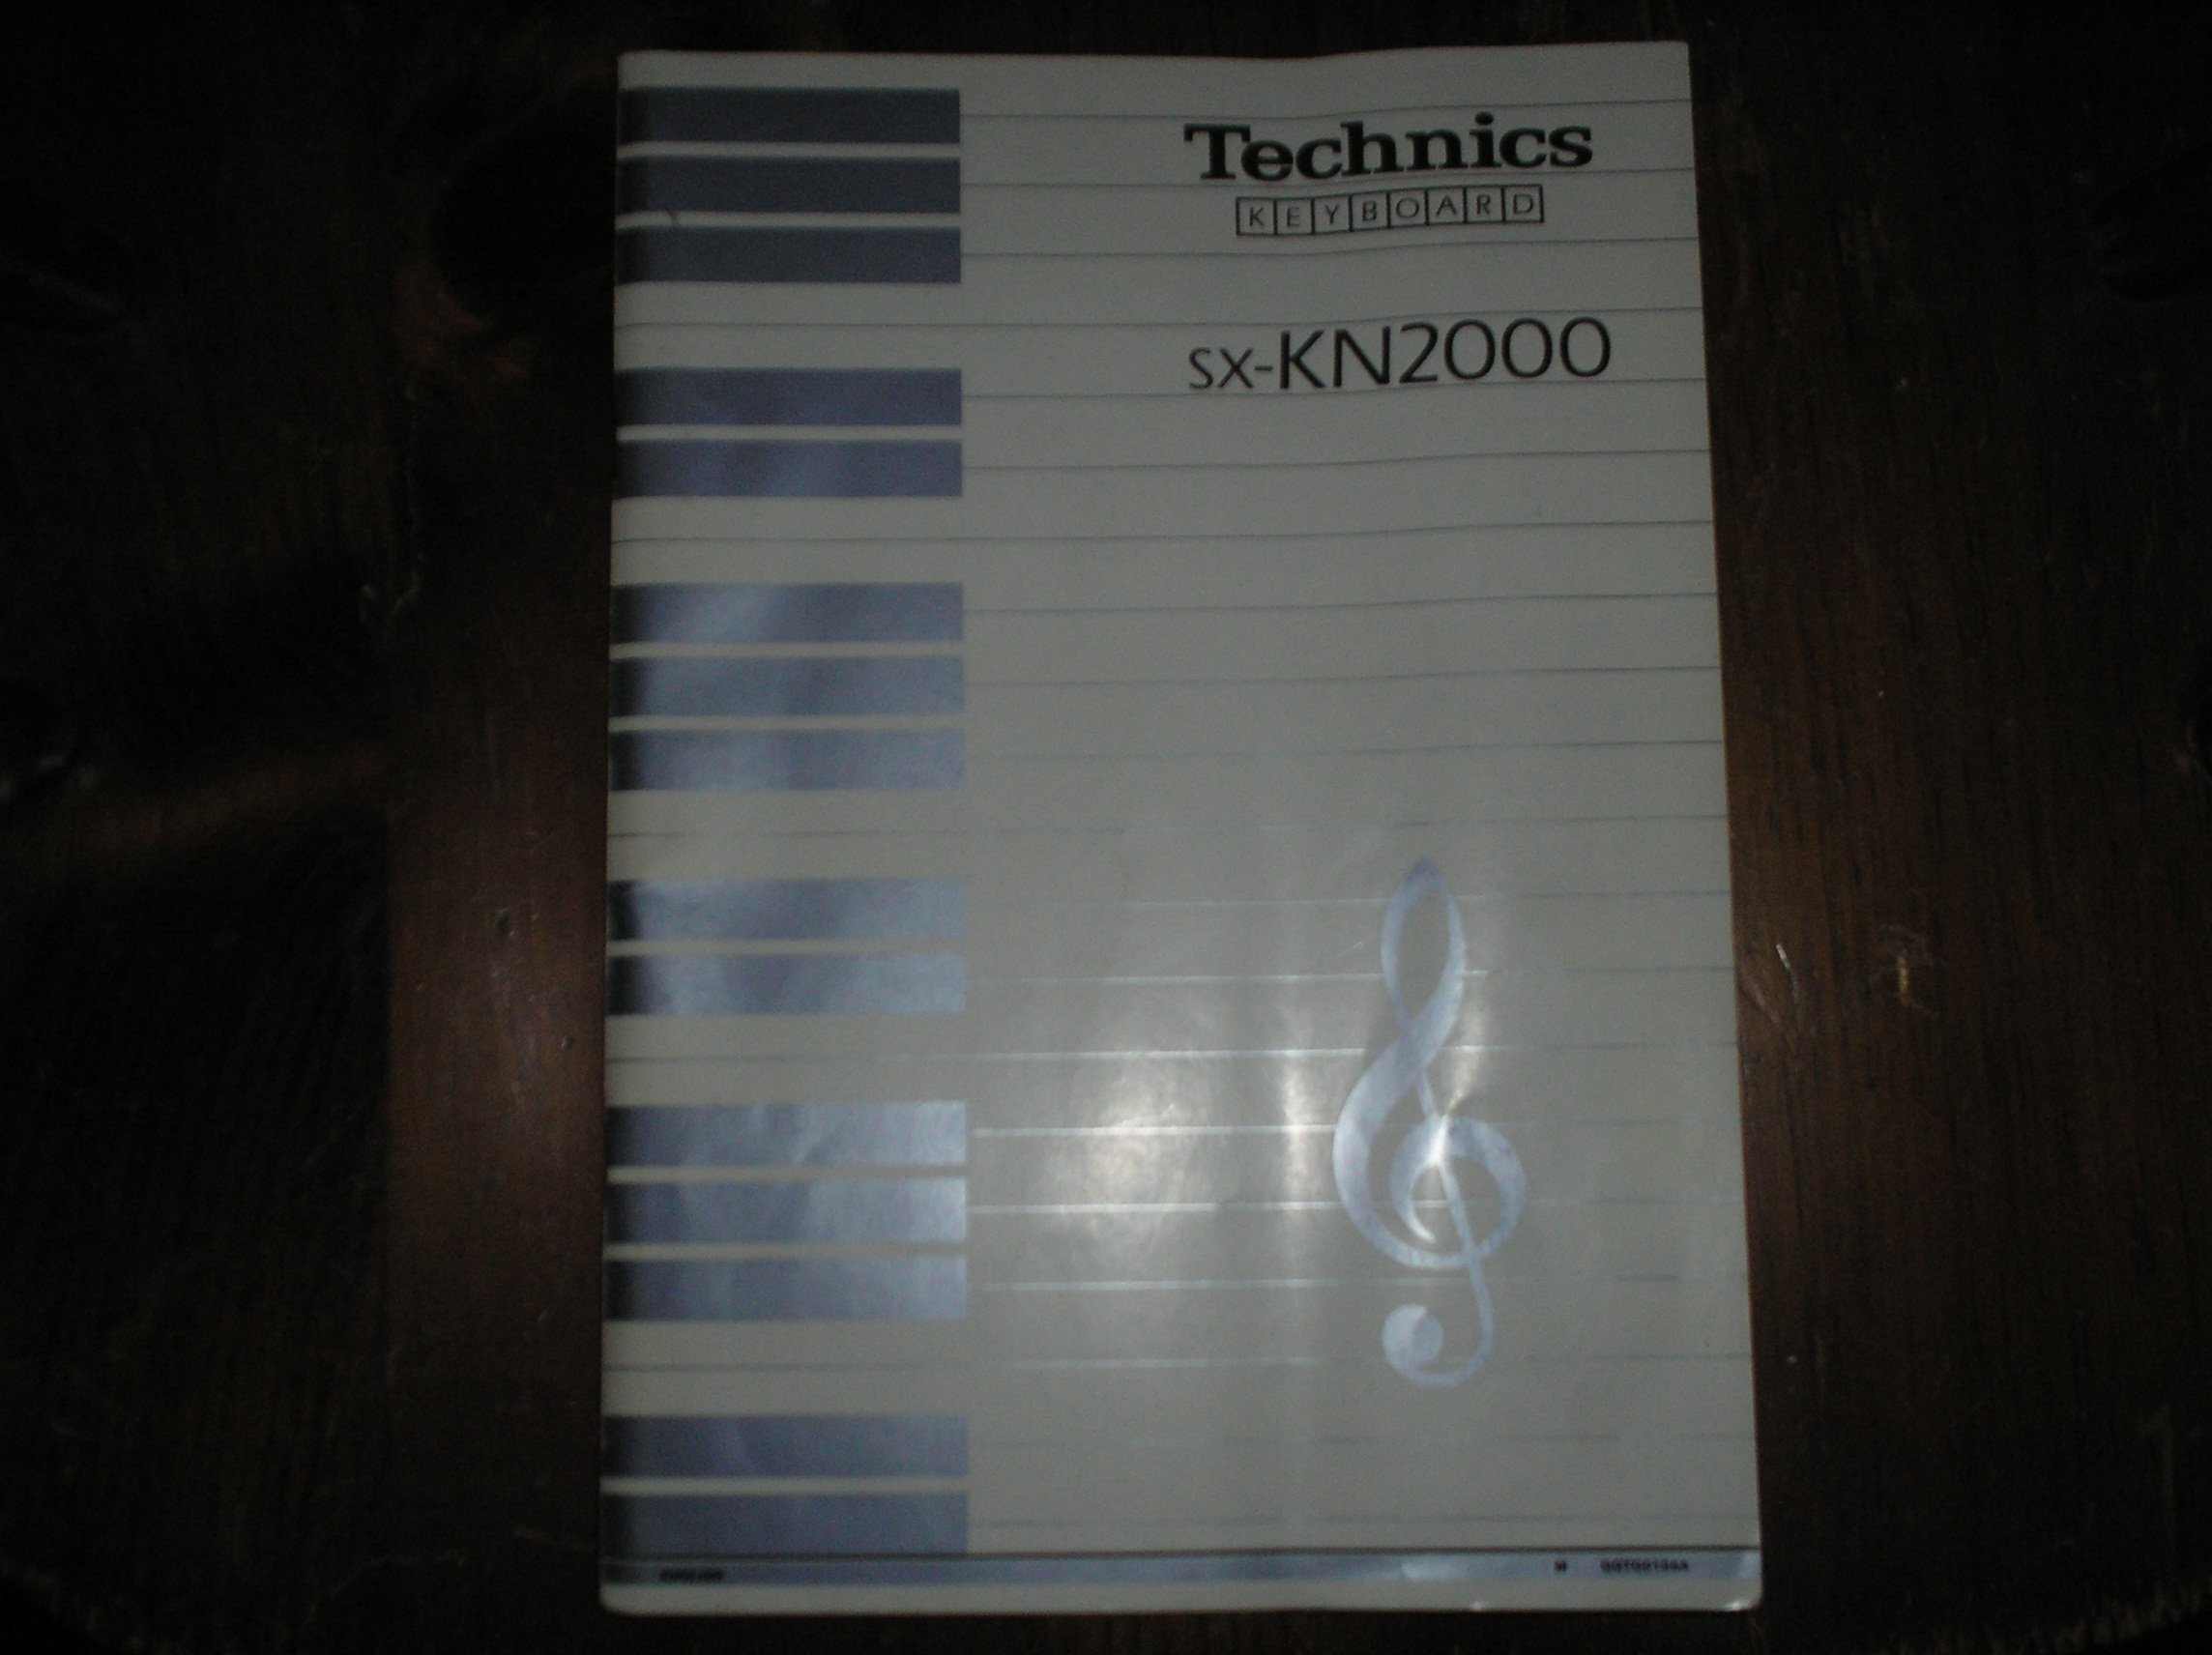 SX-KN2000 PCM Keyboard Operating Instruction Manual. 120 pages.